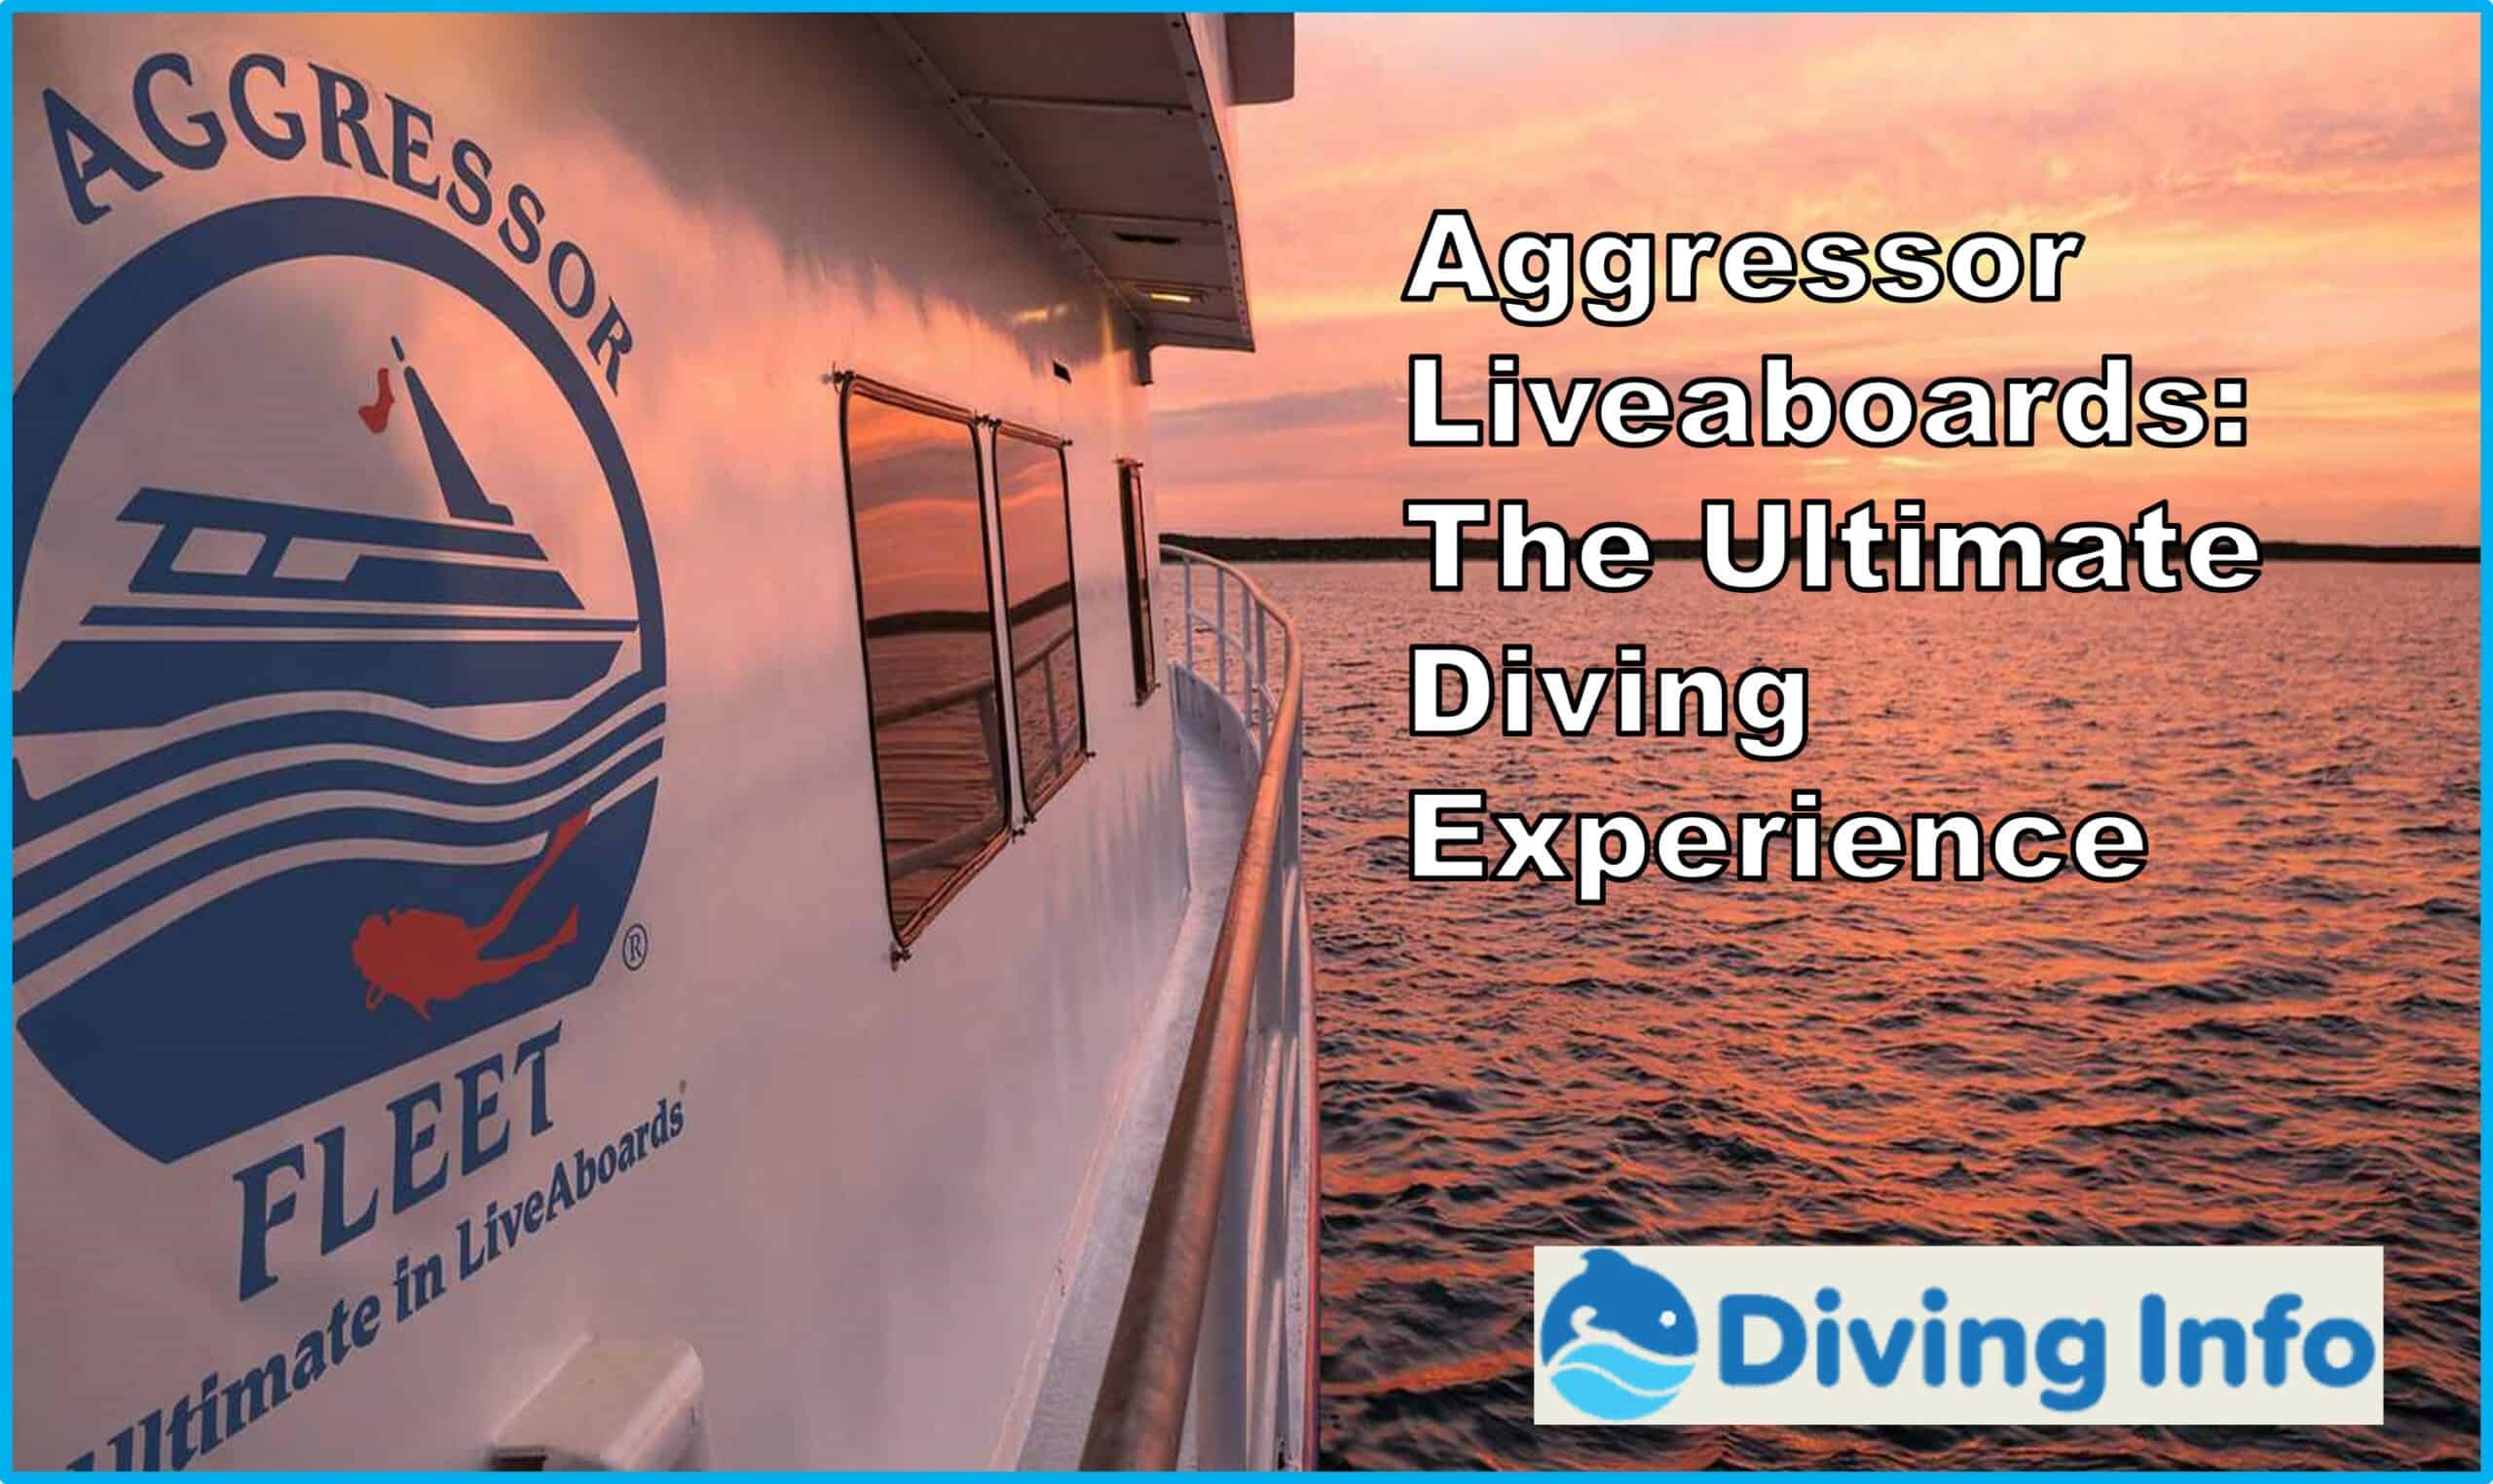 Aggressor Liveaboards: The Ultimate Diving Experience